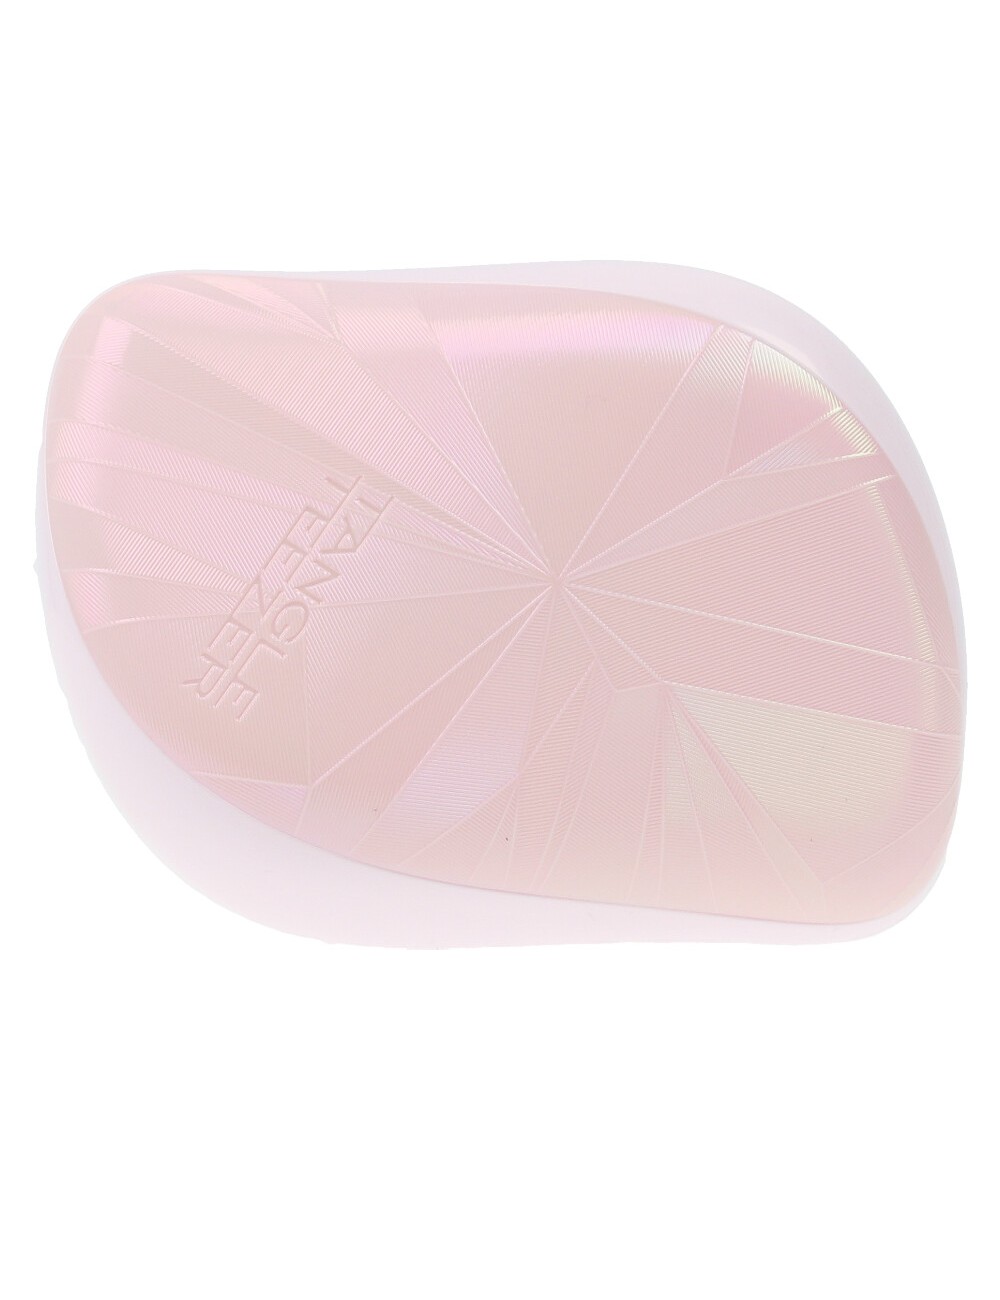 COMPACT STYLER limited edition smashed holo pink